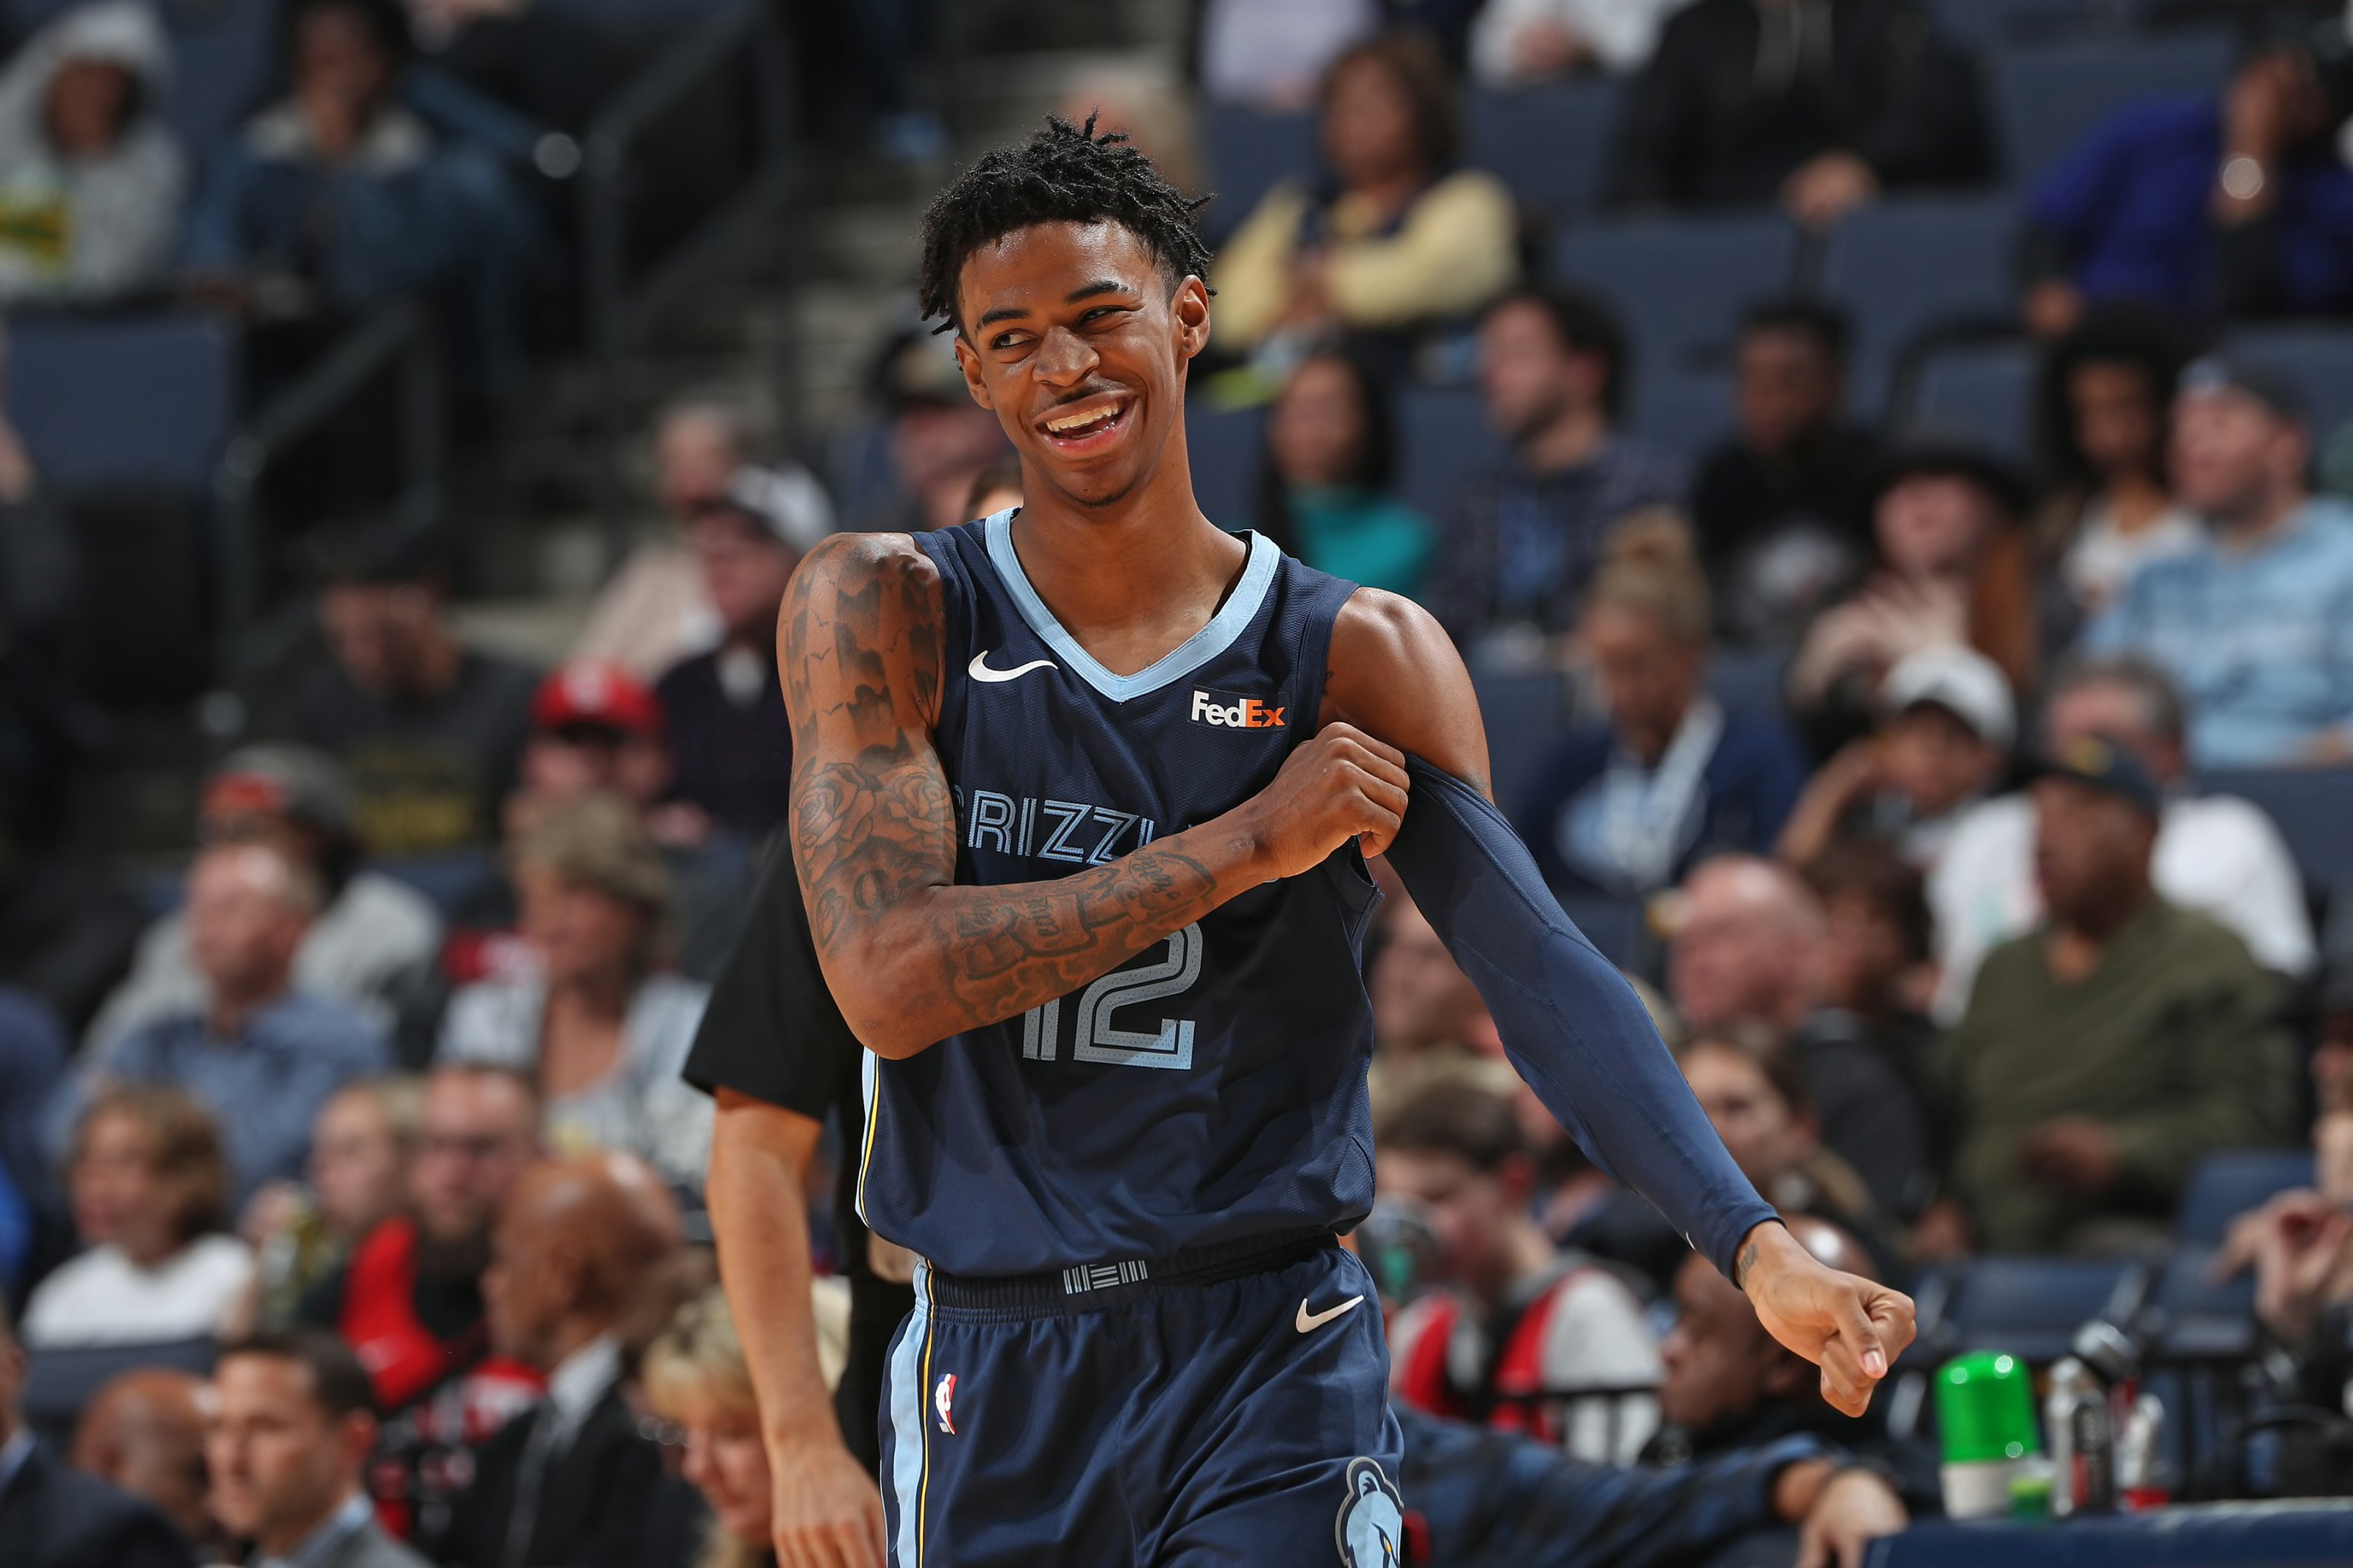 Nylon Calculus Rookie Review: What did the Grizzlies see from Ja Morant?